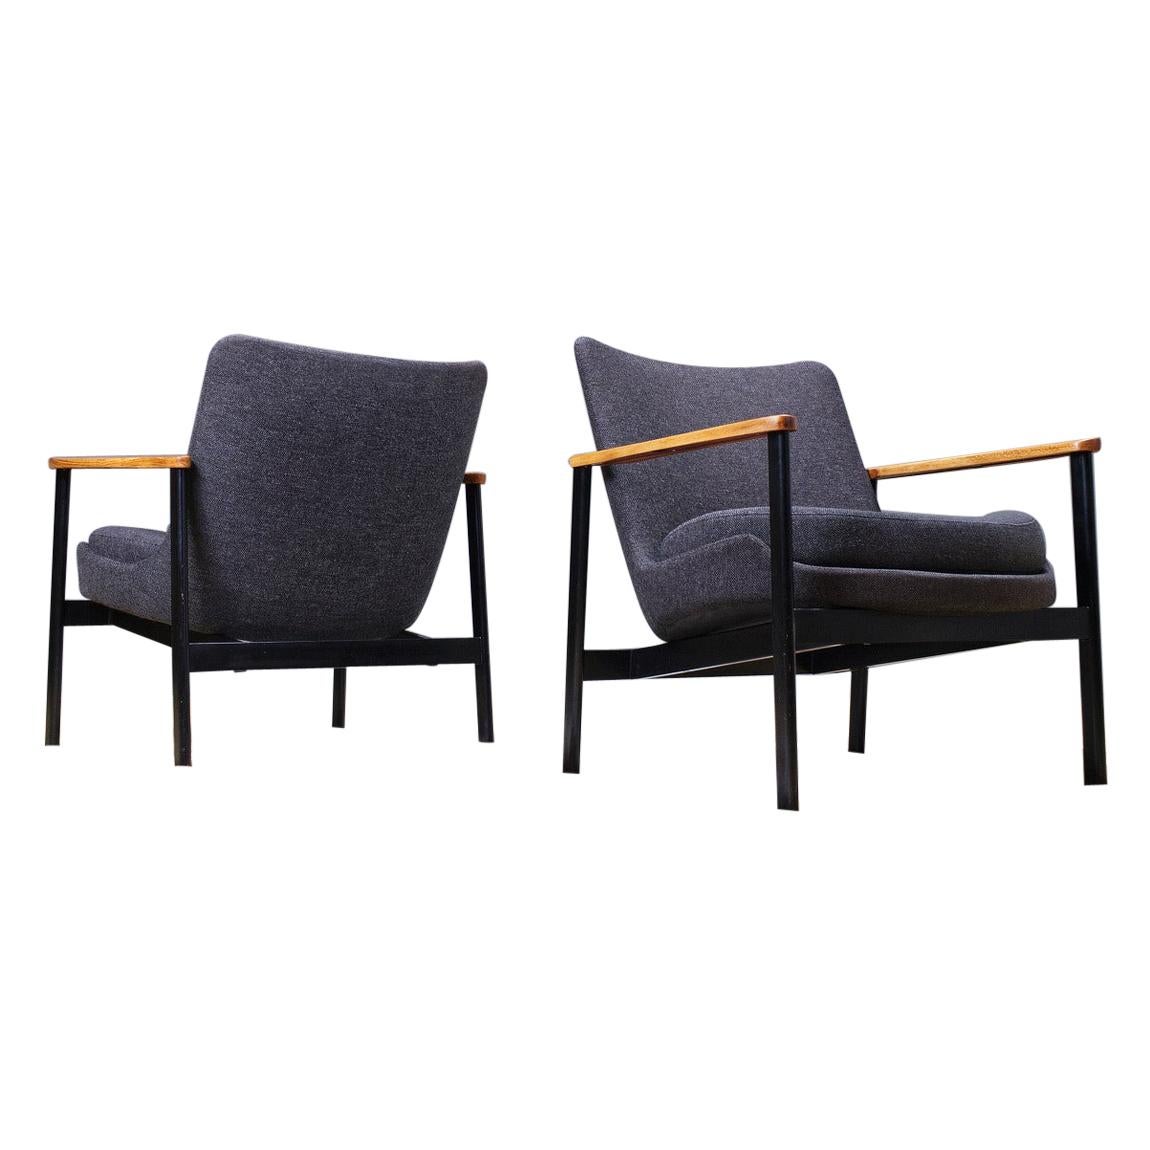 Set of 2 Ib Kofod-Larsen Lounge Chairs in Grey Fabric, Beech and Black Metal For Sale